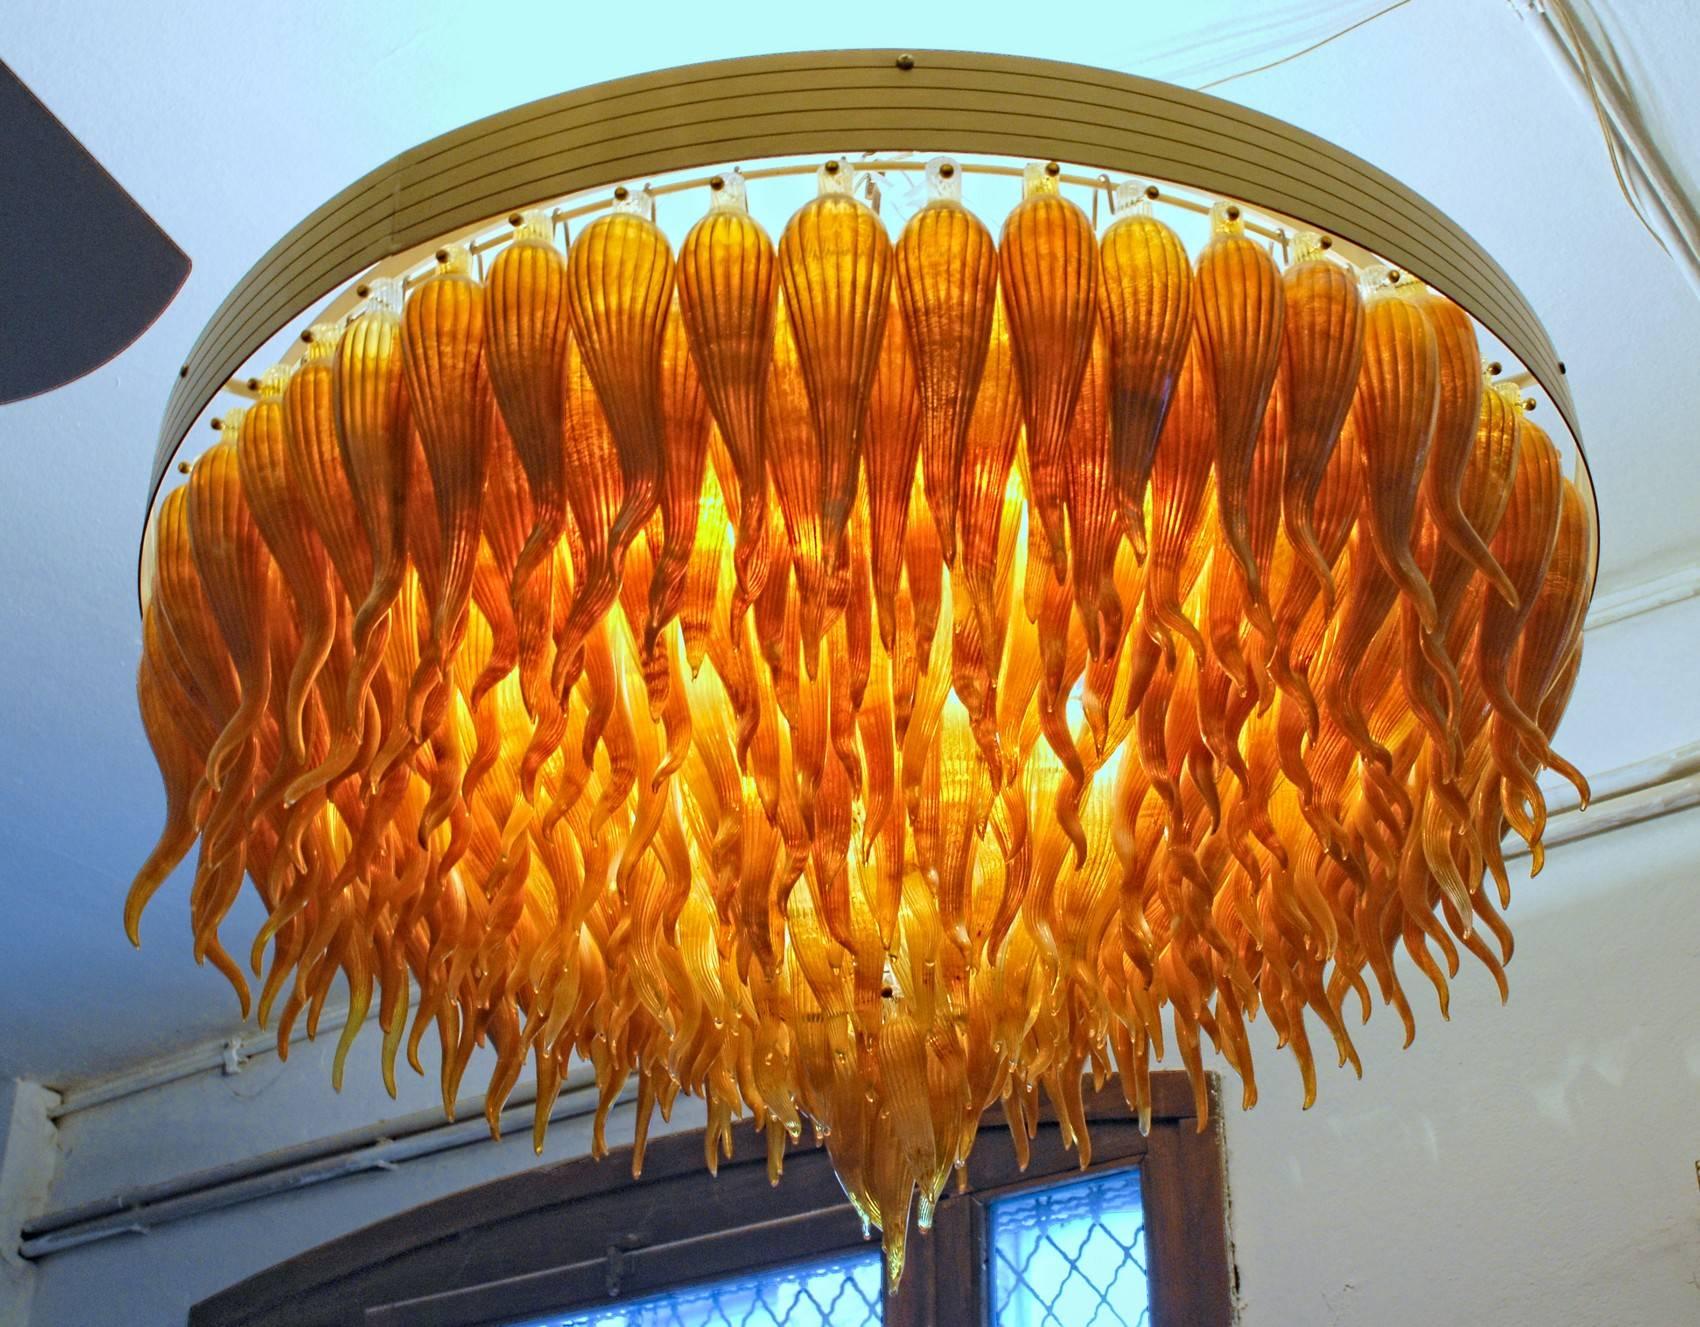 This chandelier was made at Pino Signoretto's furnace. Owner of the piece said that he made two like this, one in aquamarine and cobalt mix and this one in onyx calcedonia glass which is a typical Signoretto glass finish, used in small sculptures.